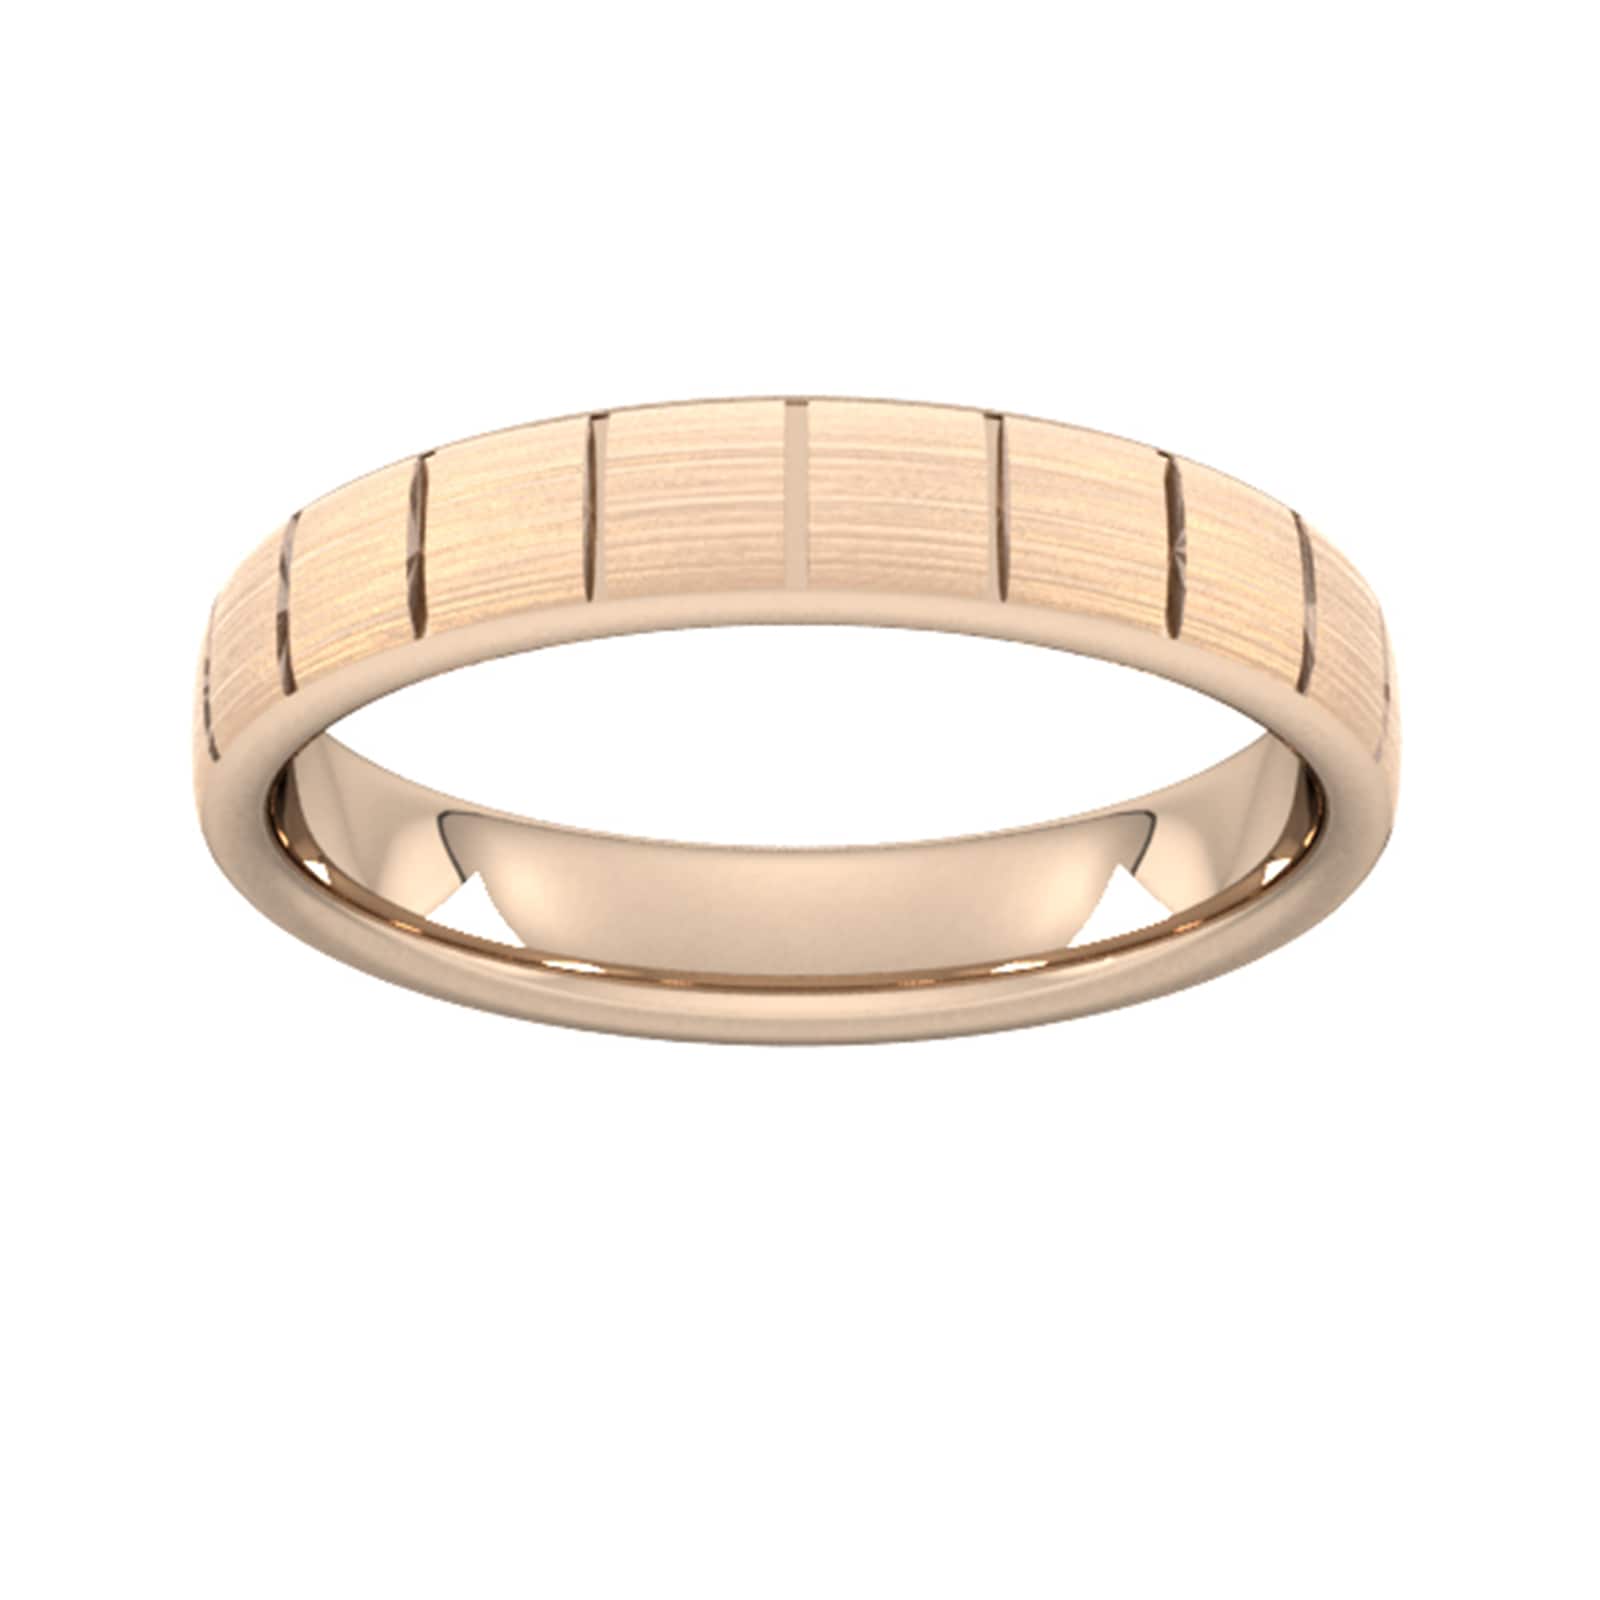 4mm D Shape Heavy Vertical Lines Wedding Ring In 9 Carat Rose Gold - Ring Size Z